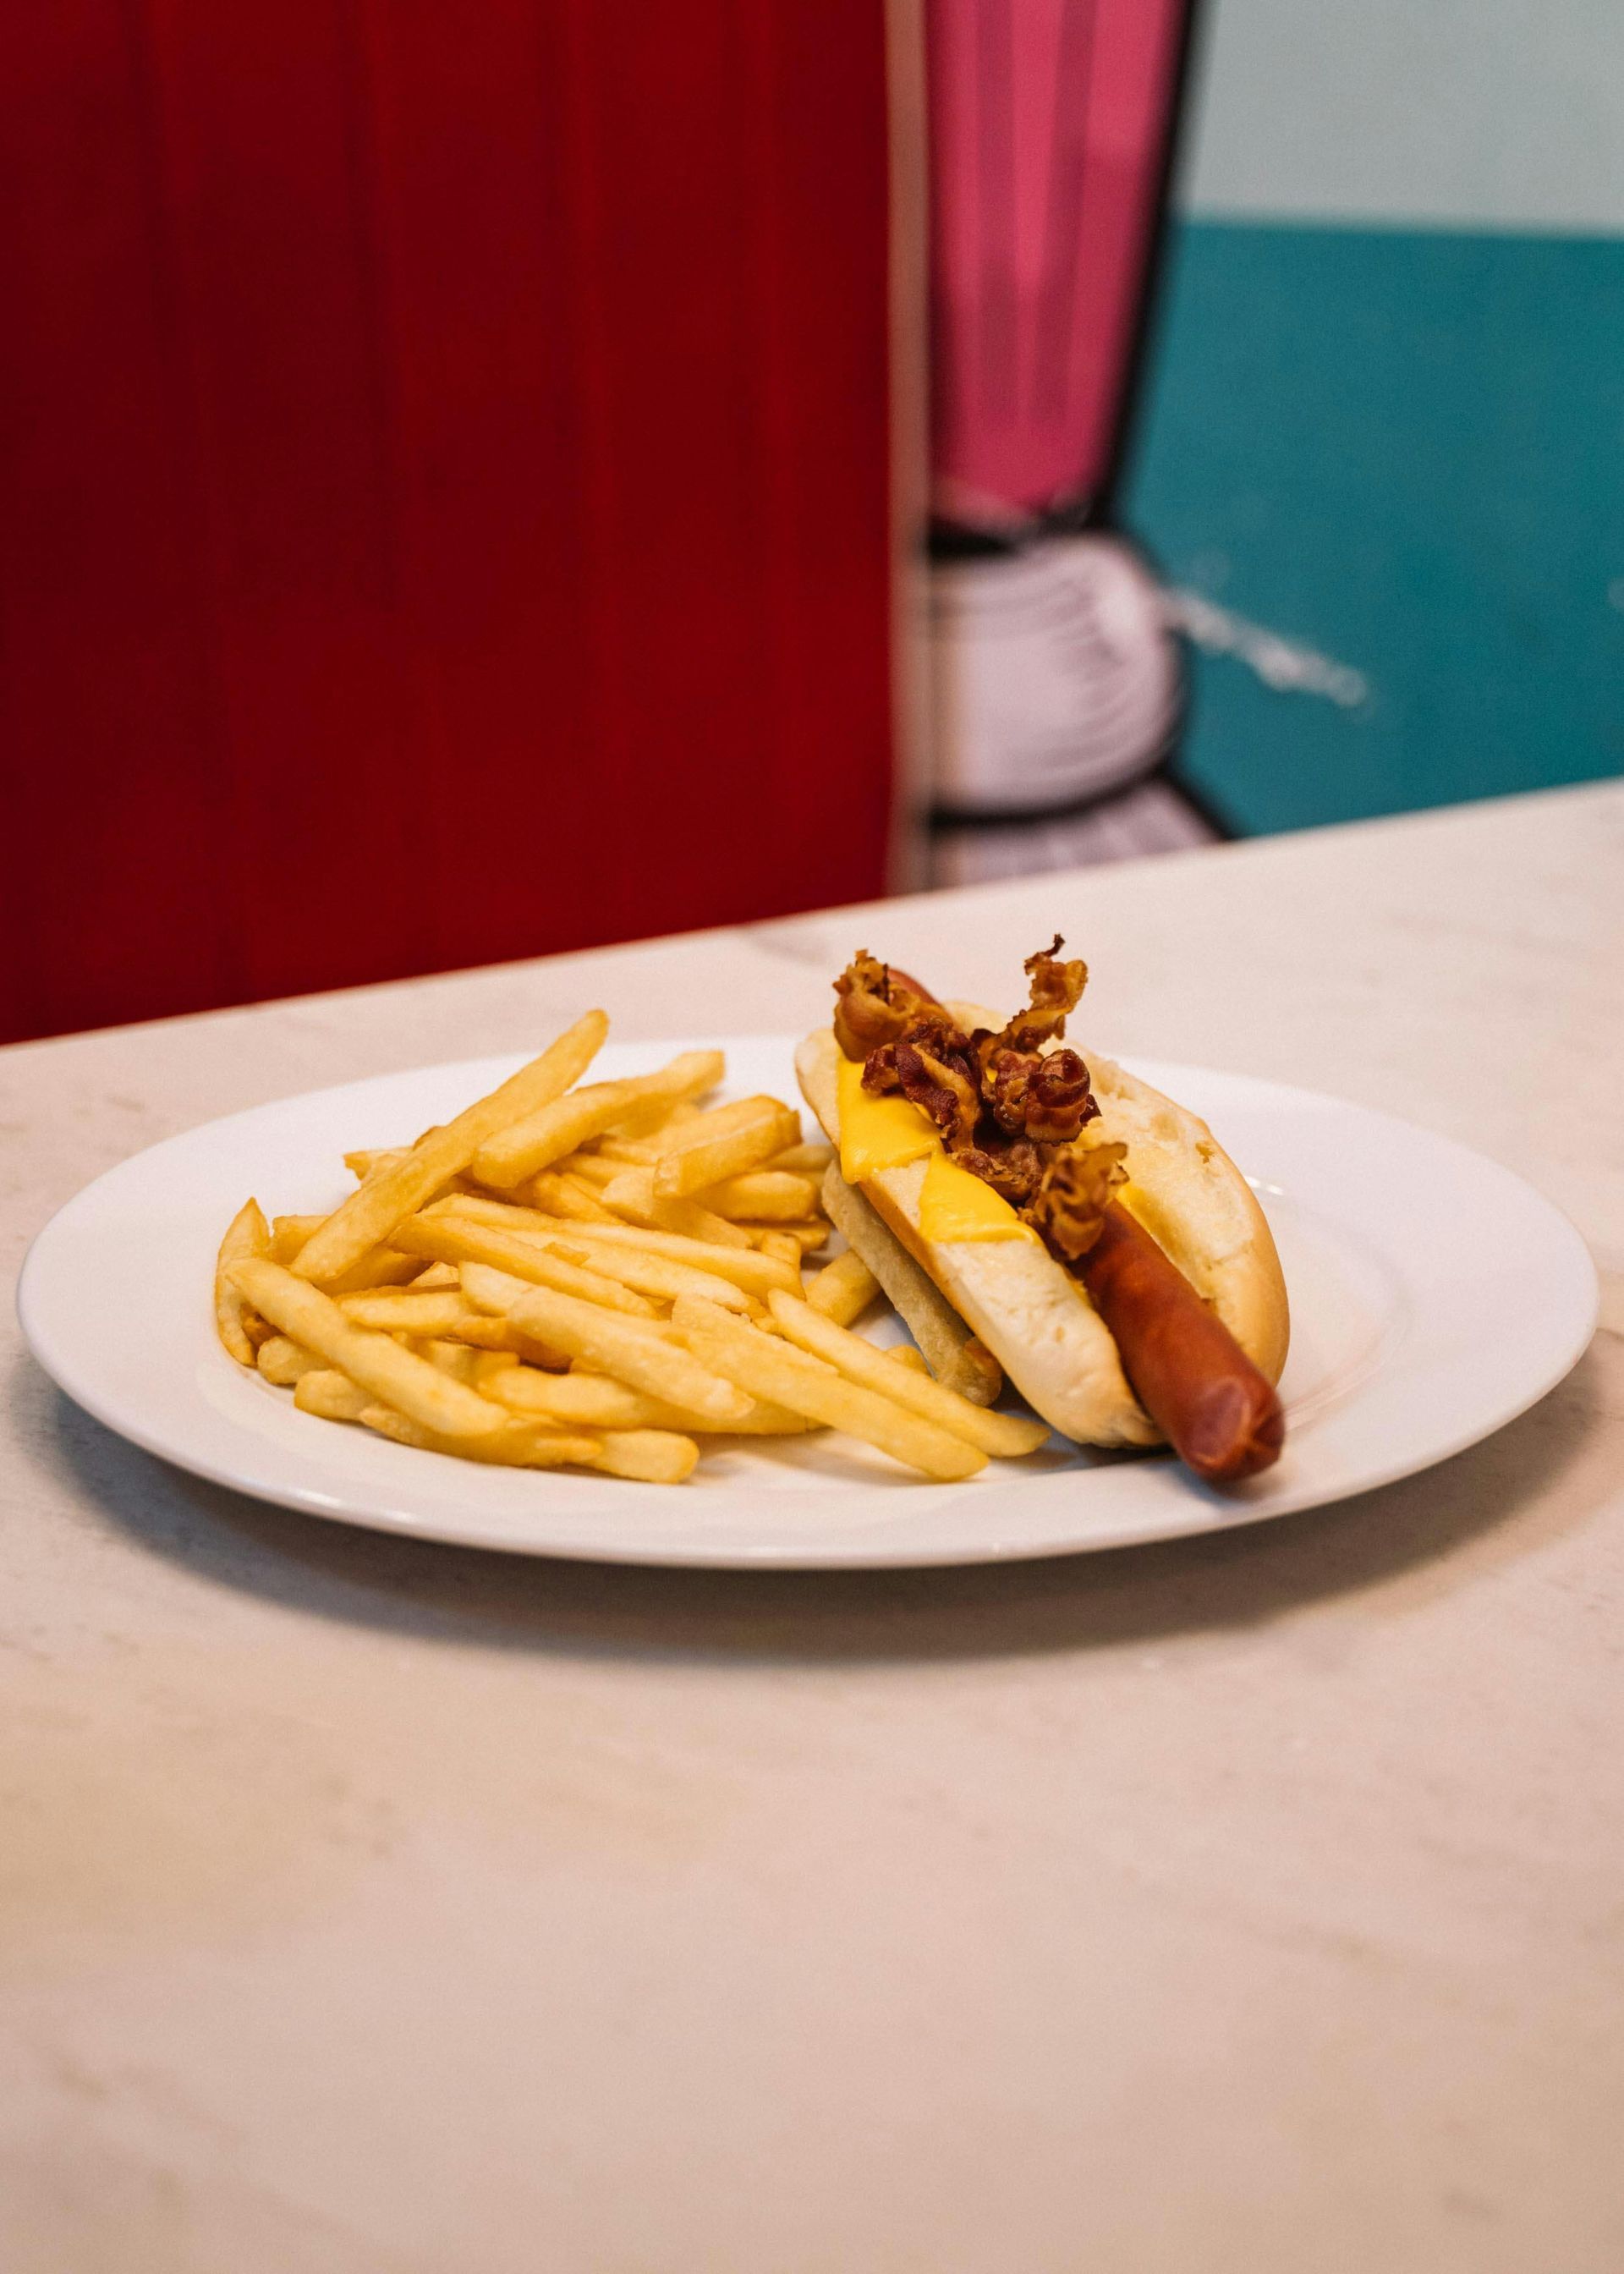 Hot Dog Sandwich And Fries